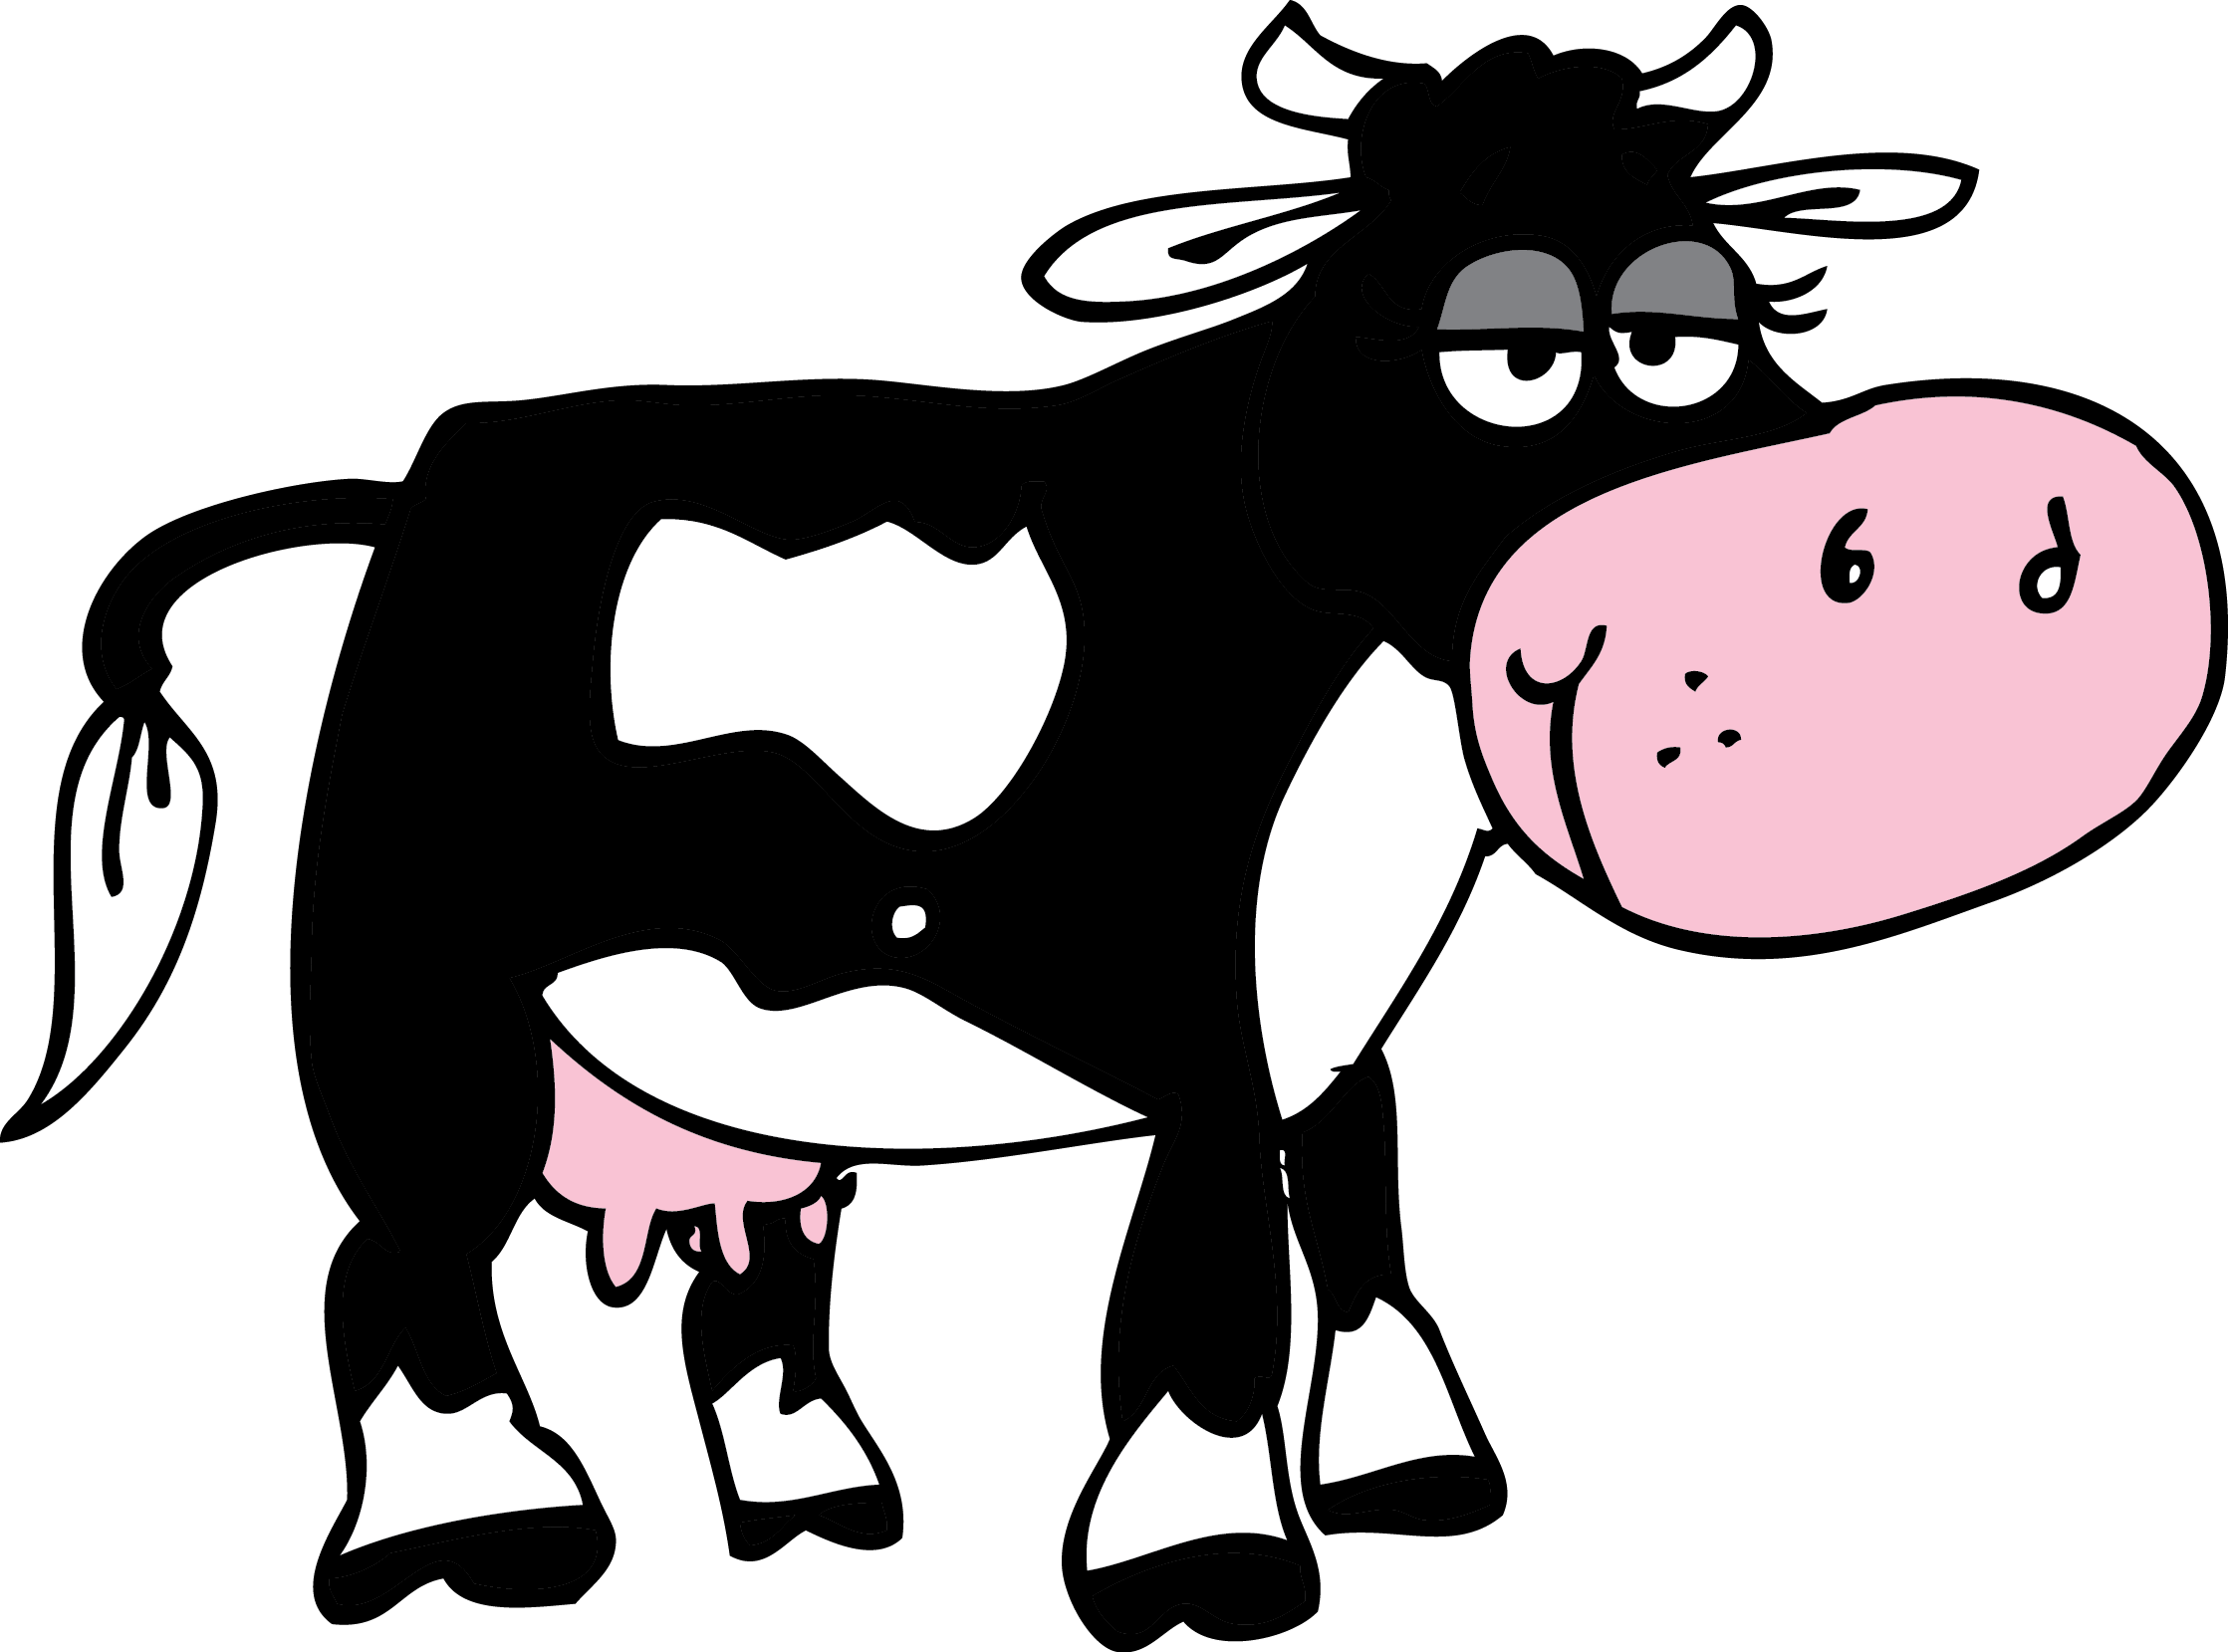 Cartoon cow images pictures. Sheep clipart jumping